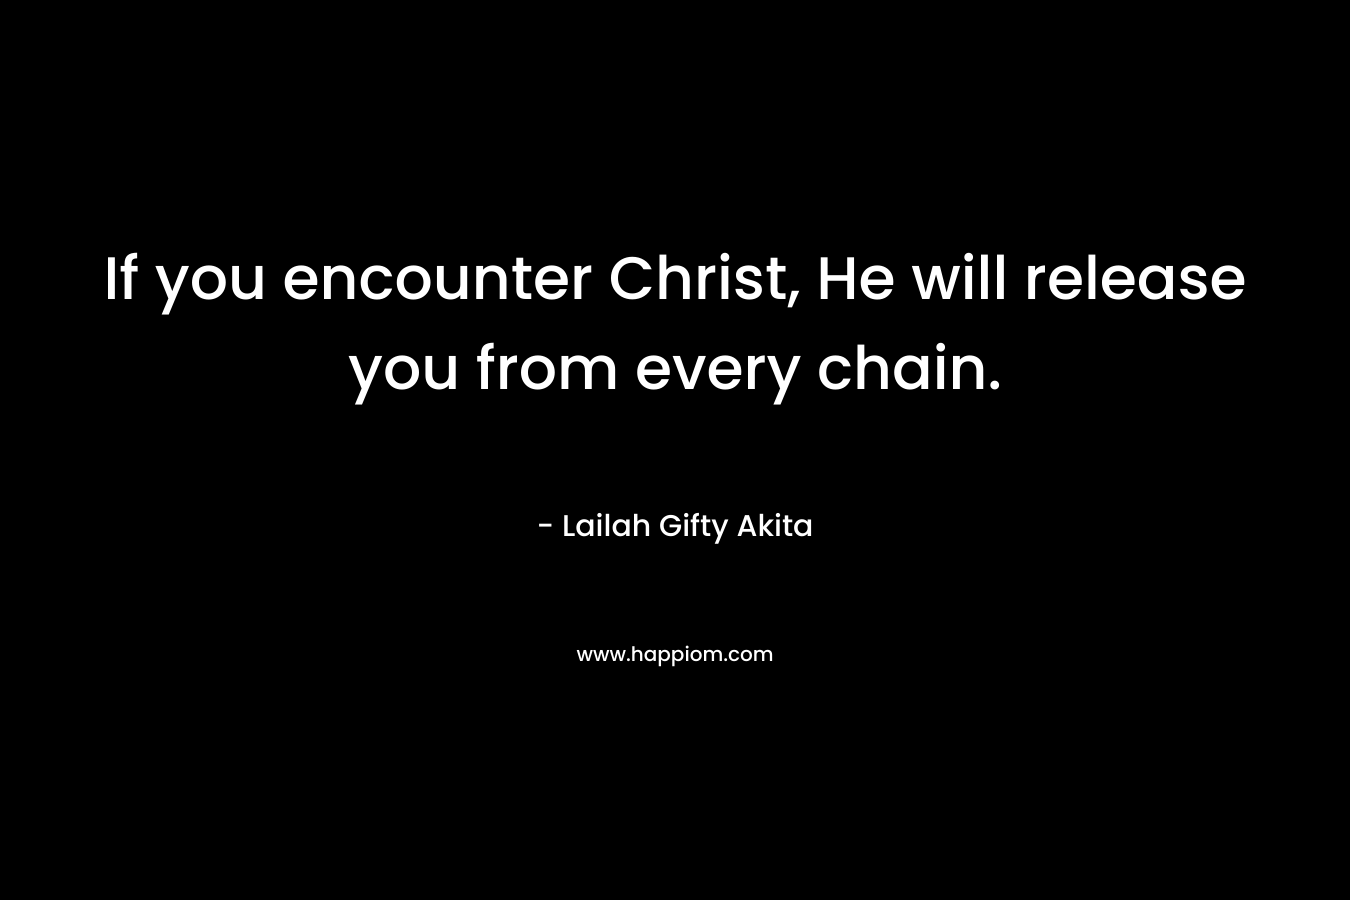 If you encounter Christ, He will release you from every chain. – Lailah Gifty Akita